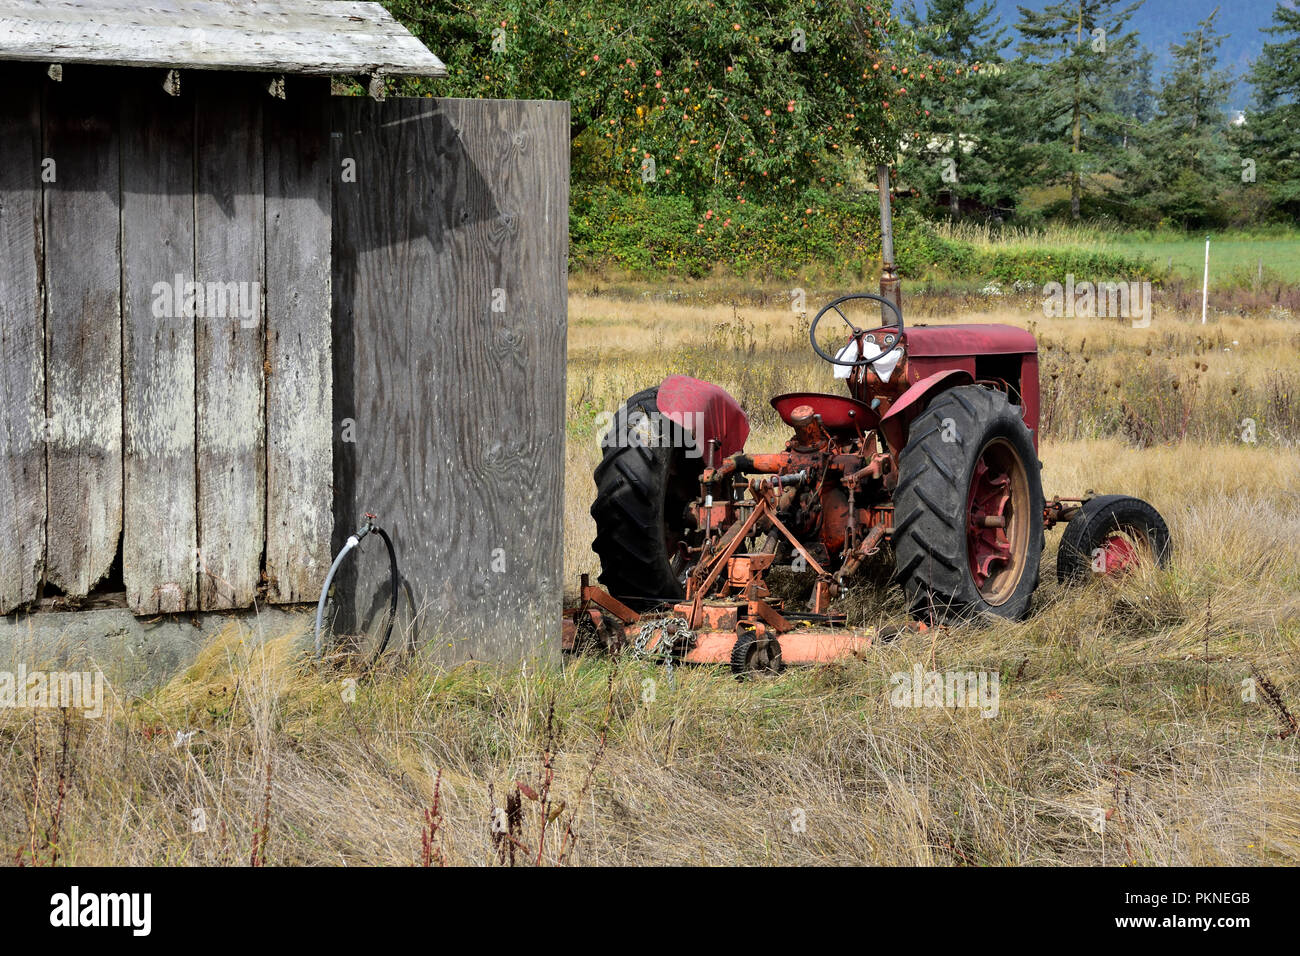 Tractor sits idle in a farm field. Stock Photo